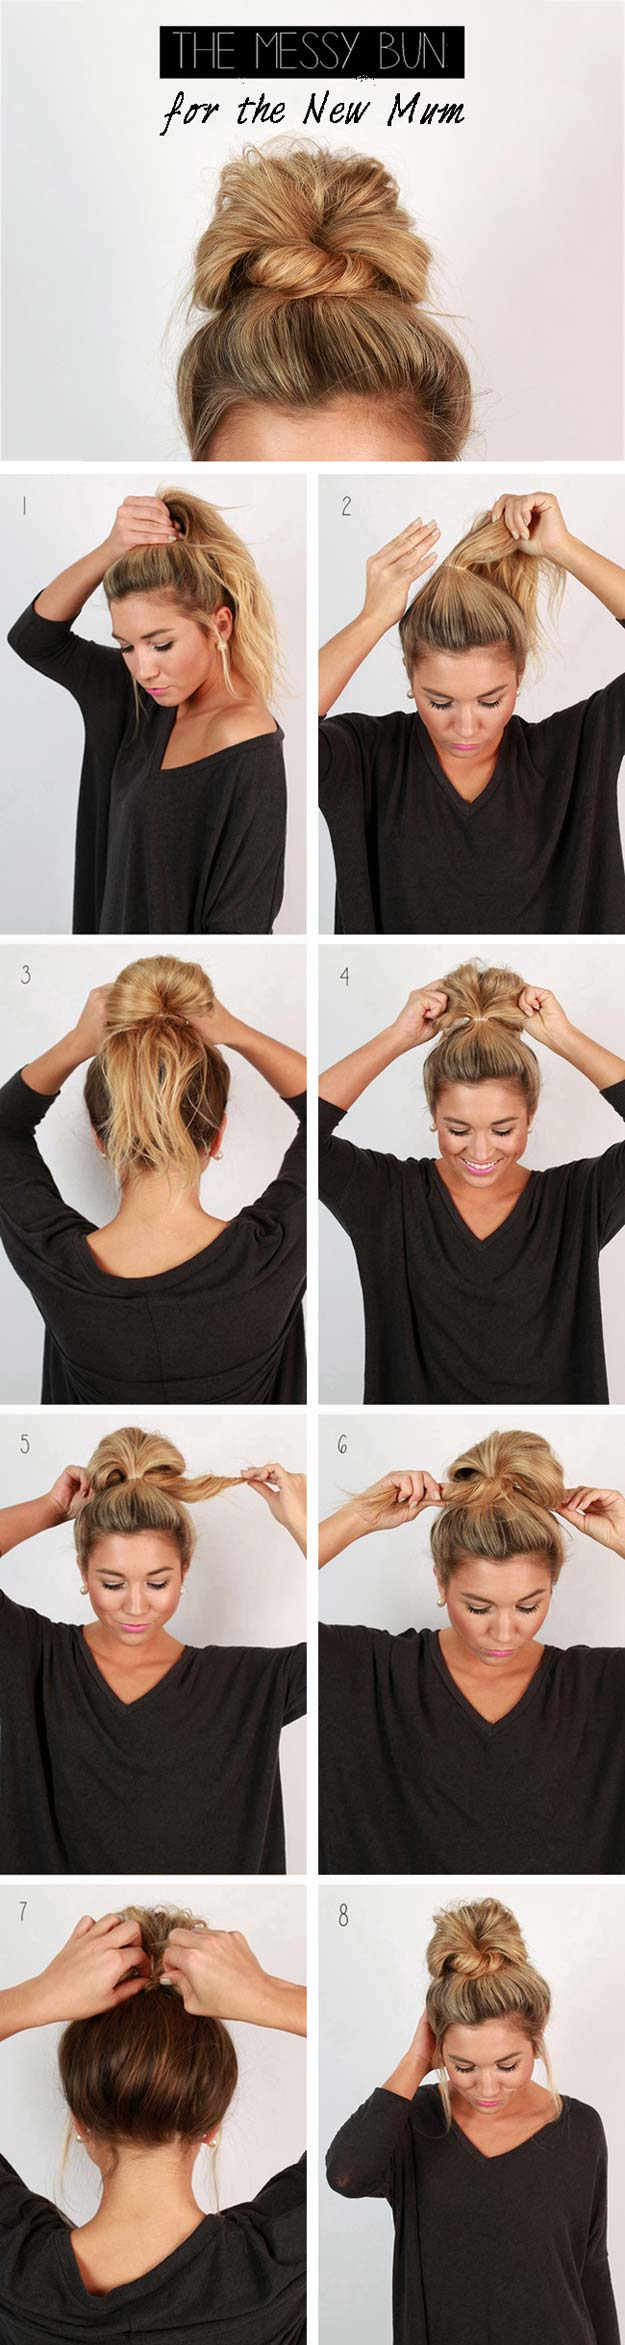 Cool and Easy DIY Hairstyles - Messy Bun - Quick and Easy Ideas for Back to School Styles for Medium, Short and Long Hair - Fun Tips and Best Step by Step Tutorials for Teens, Prom, Weddings, Special Occasions and Work. Up dos, Braids, Top Knots and Buns, Super Summer Looks http://diyprojectsforteens.com/diy-cool-easy-hairstyles